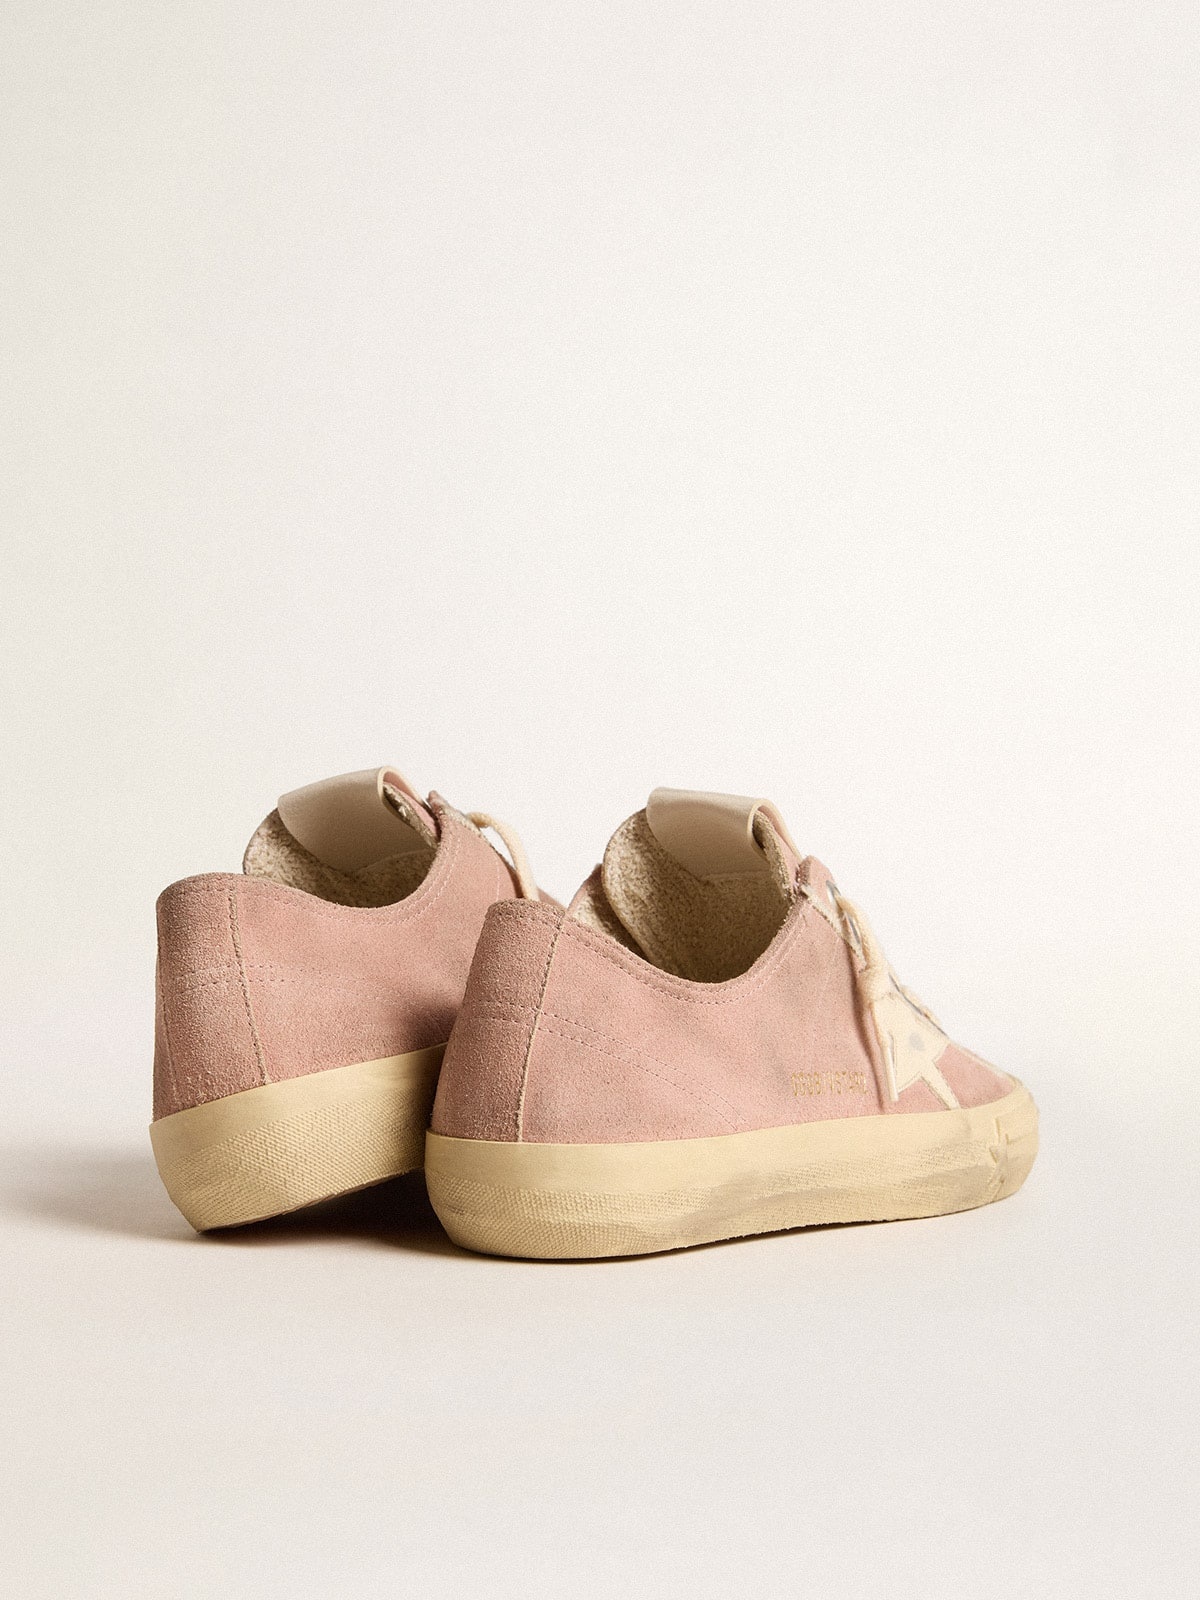 V-Star in pink suede with cream leather star - 4